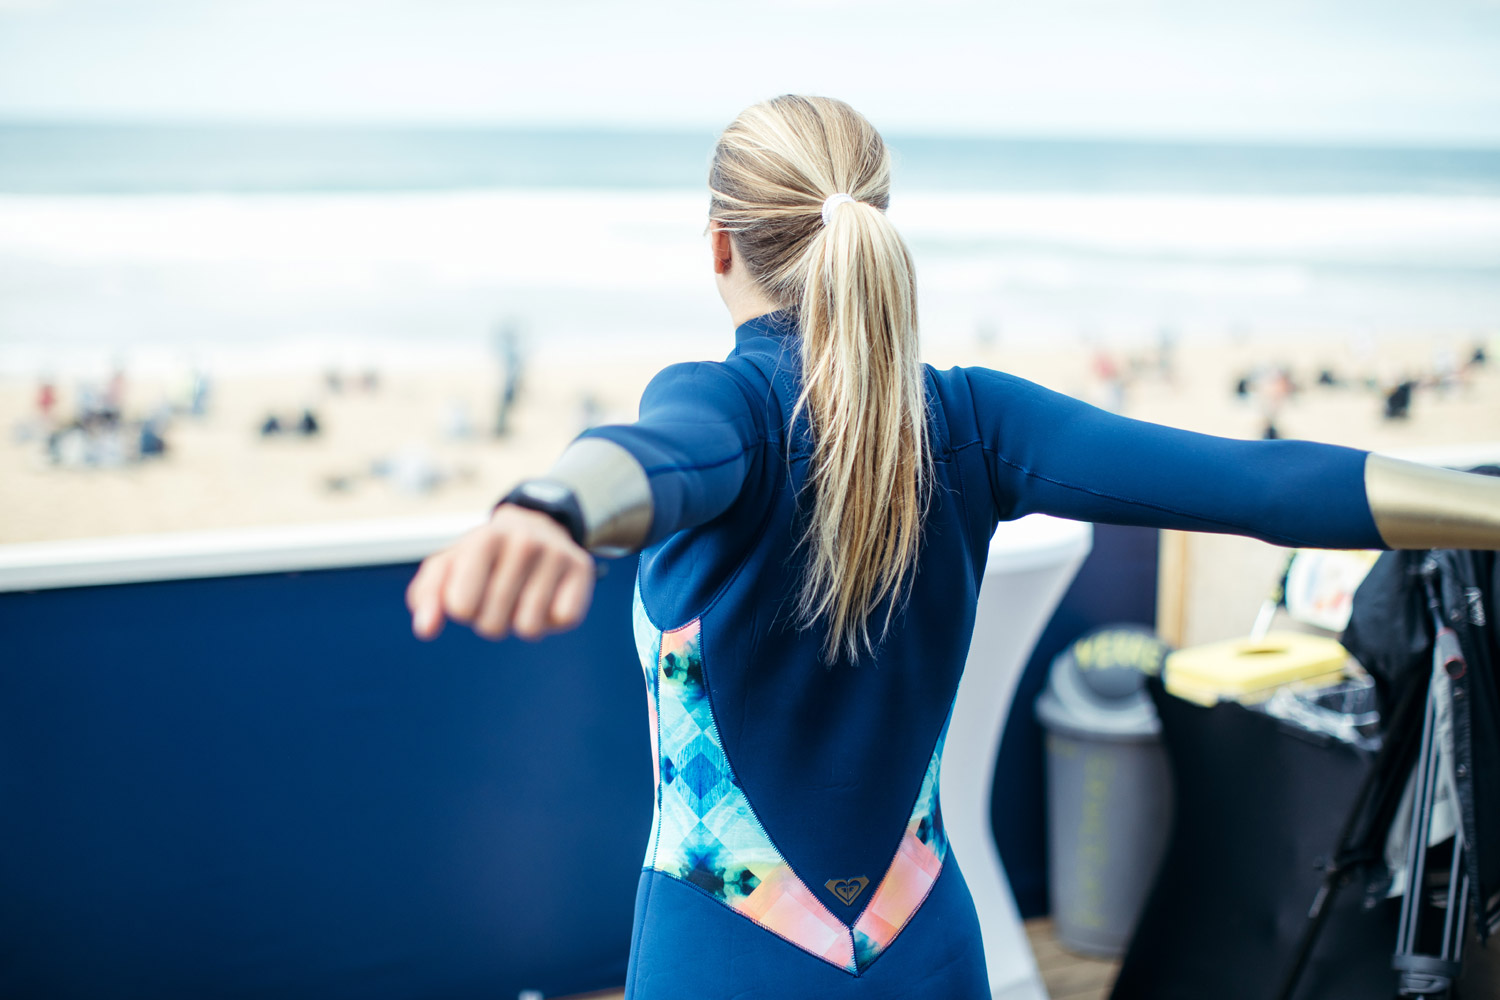 Cait Miers’ Top 10 Moments From the #ROXYpro France